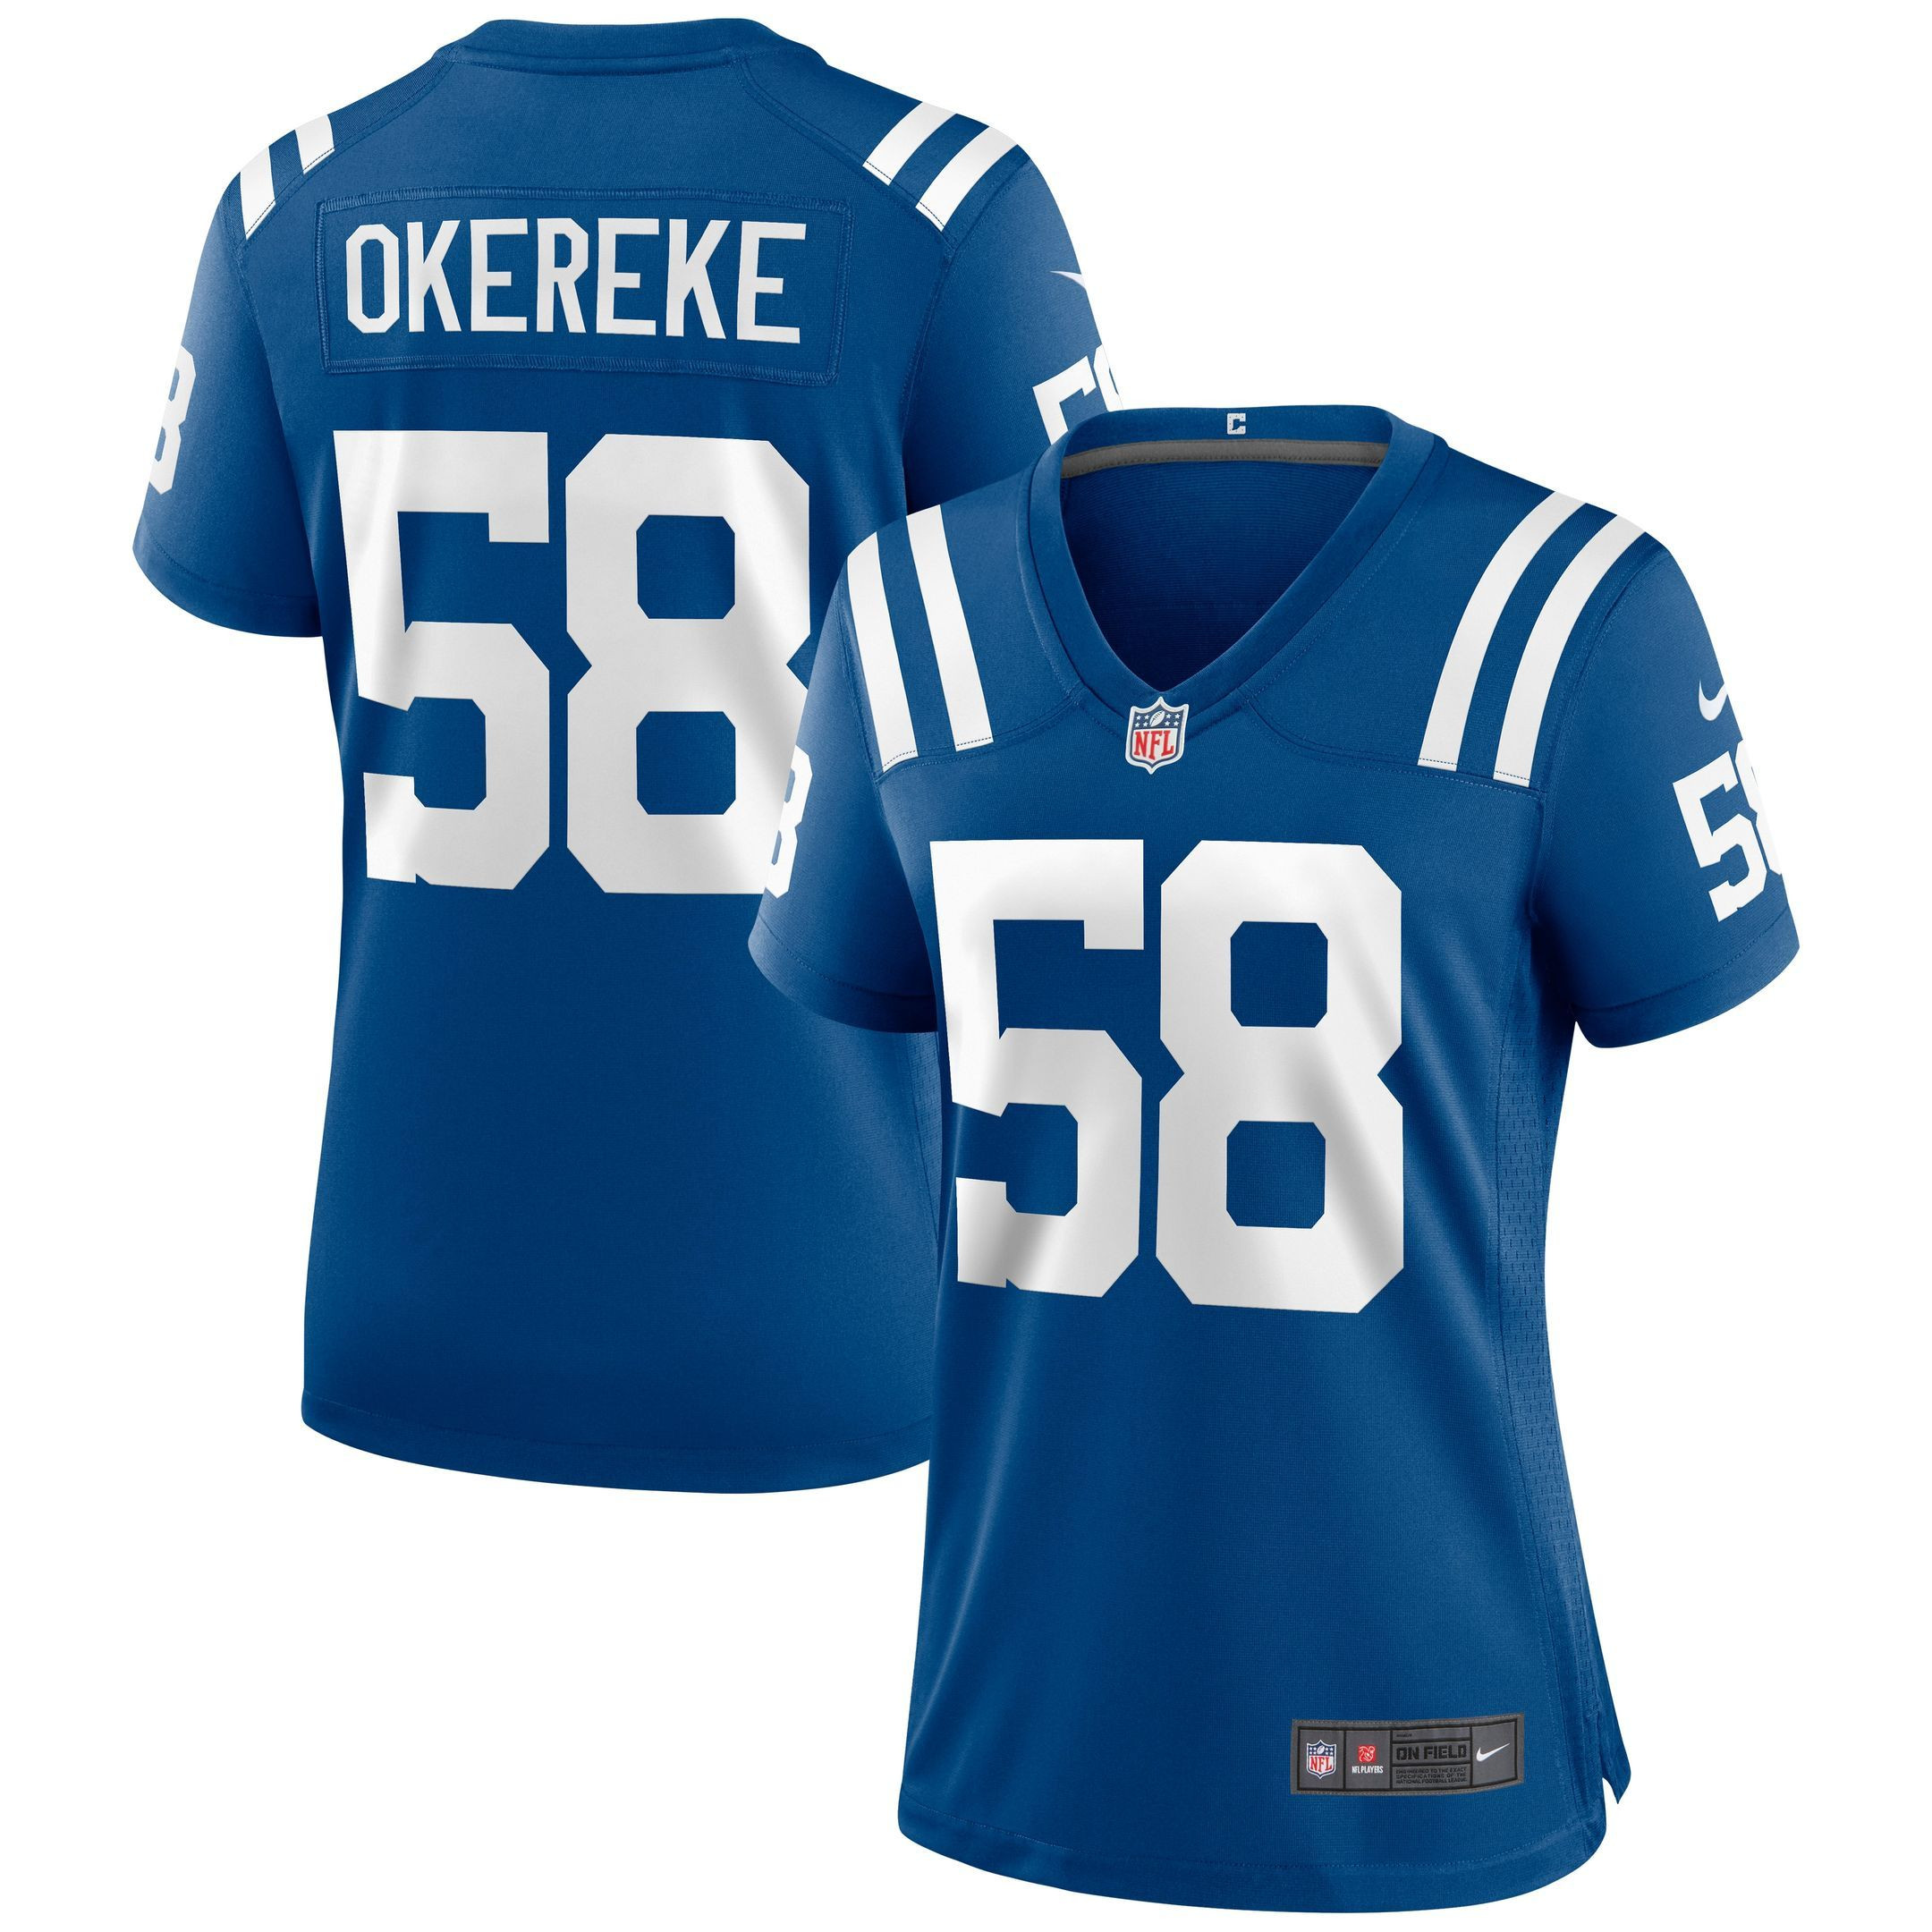 Womens Colts Bobby Okereke Royal Game Jersey Gift for Colts fans